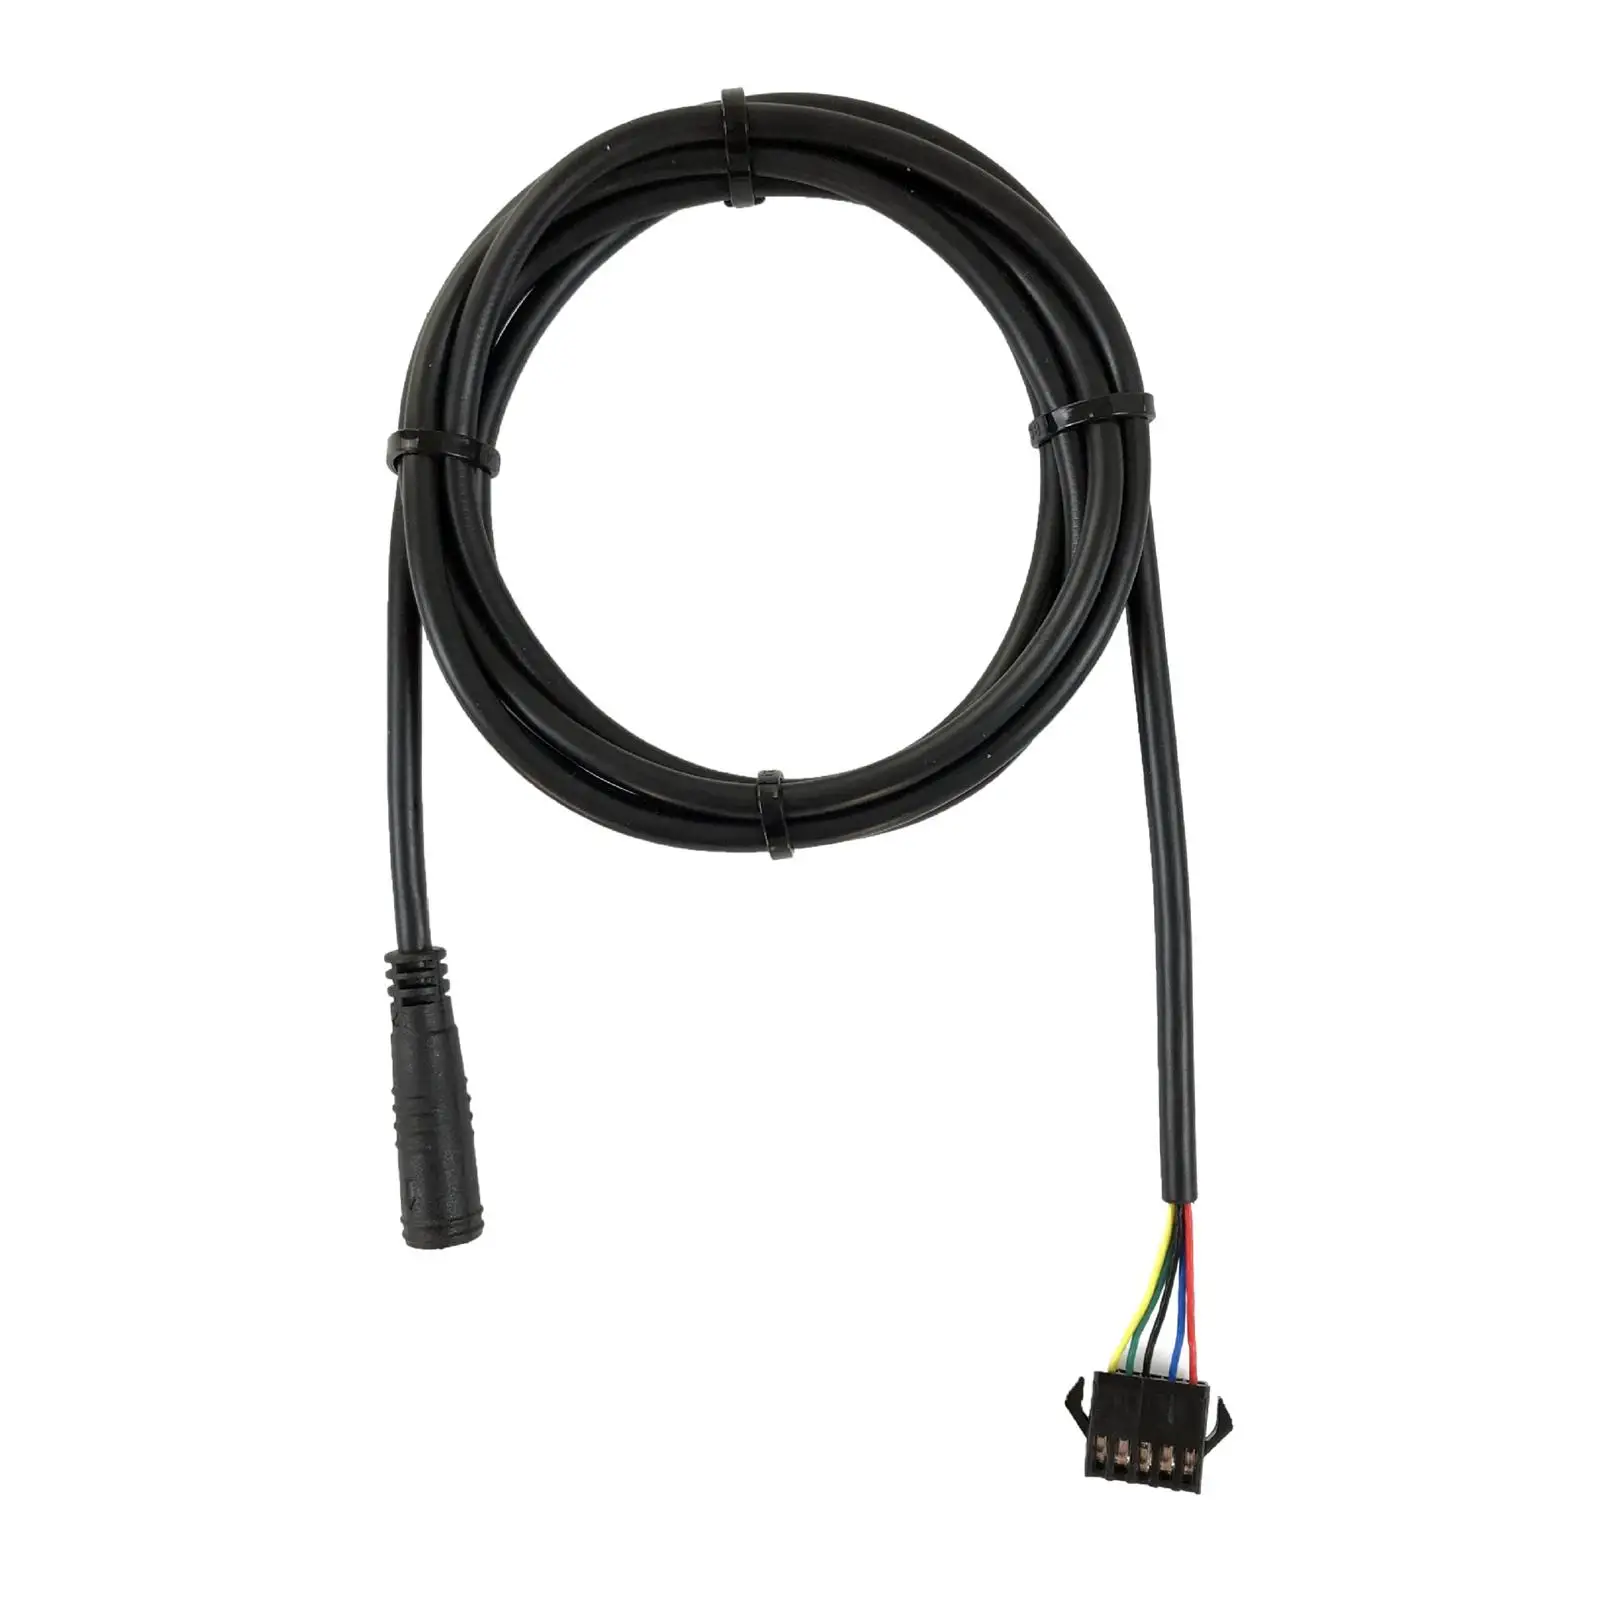 Electric Bicycle Connecting Cable Repair Female Replace 57inch for Scooter Skateboard